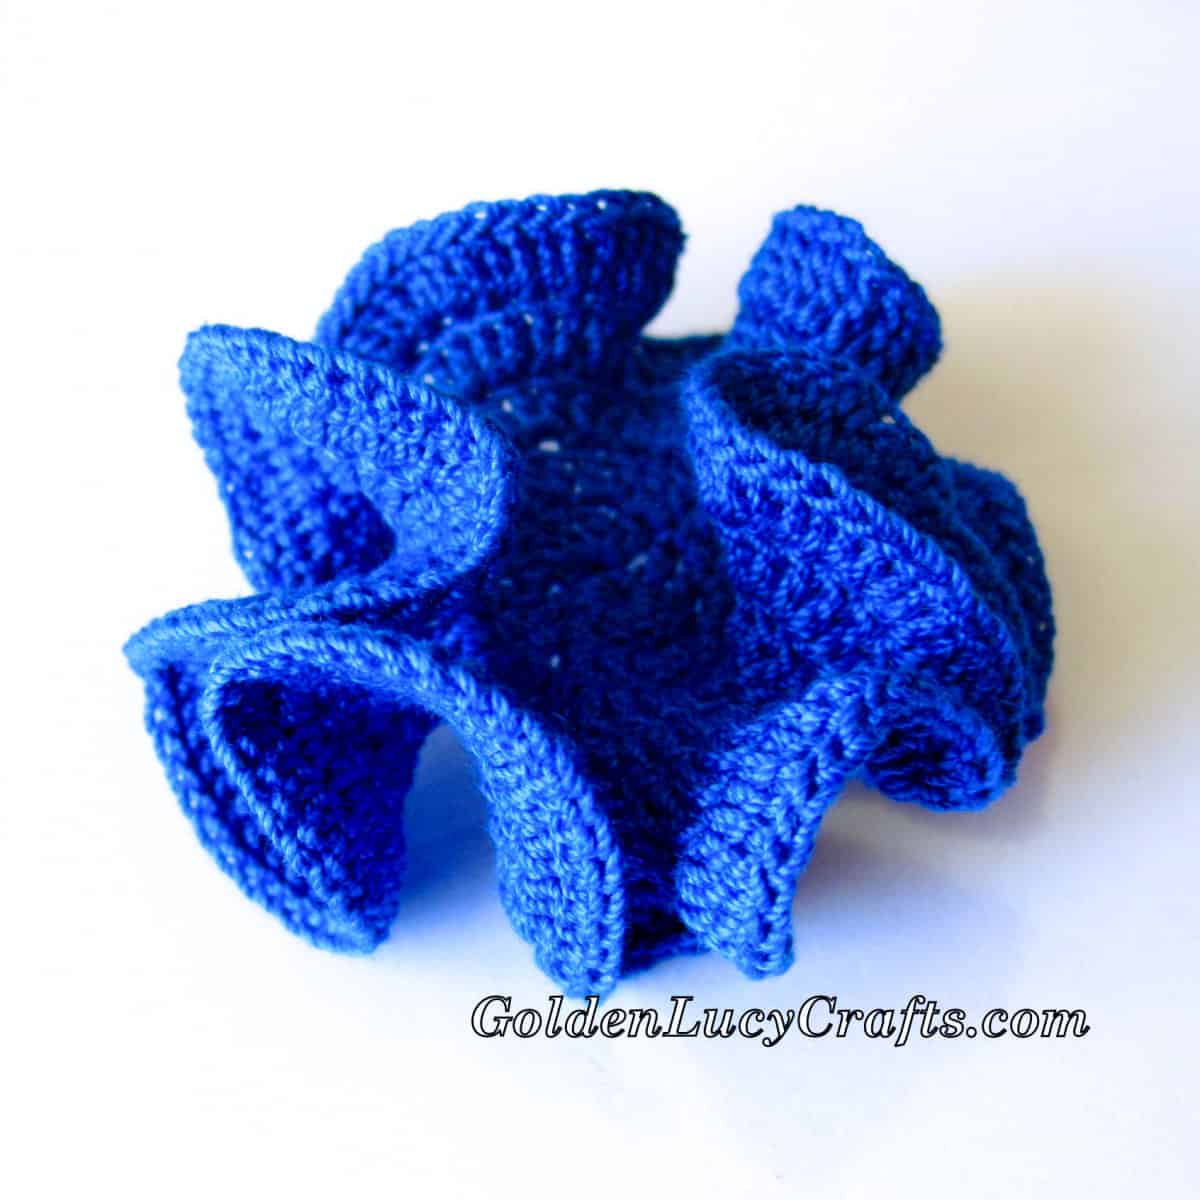 Crochet hyperbolic coral in royal blue color.